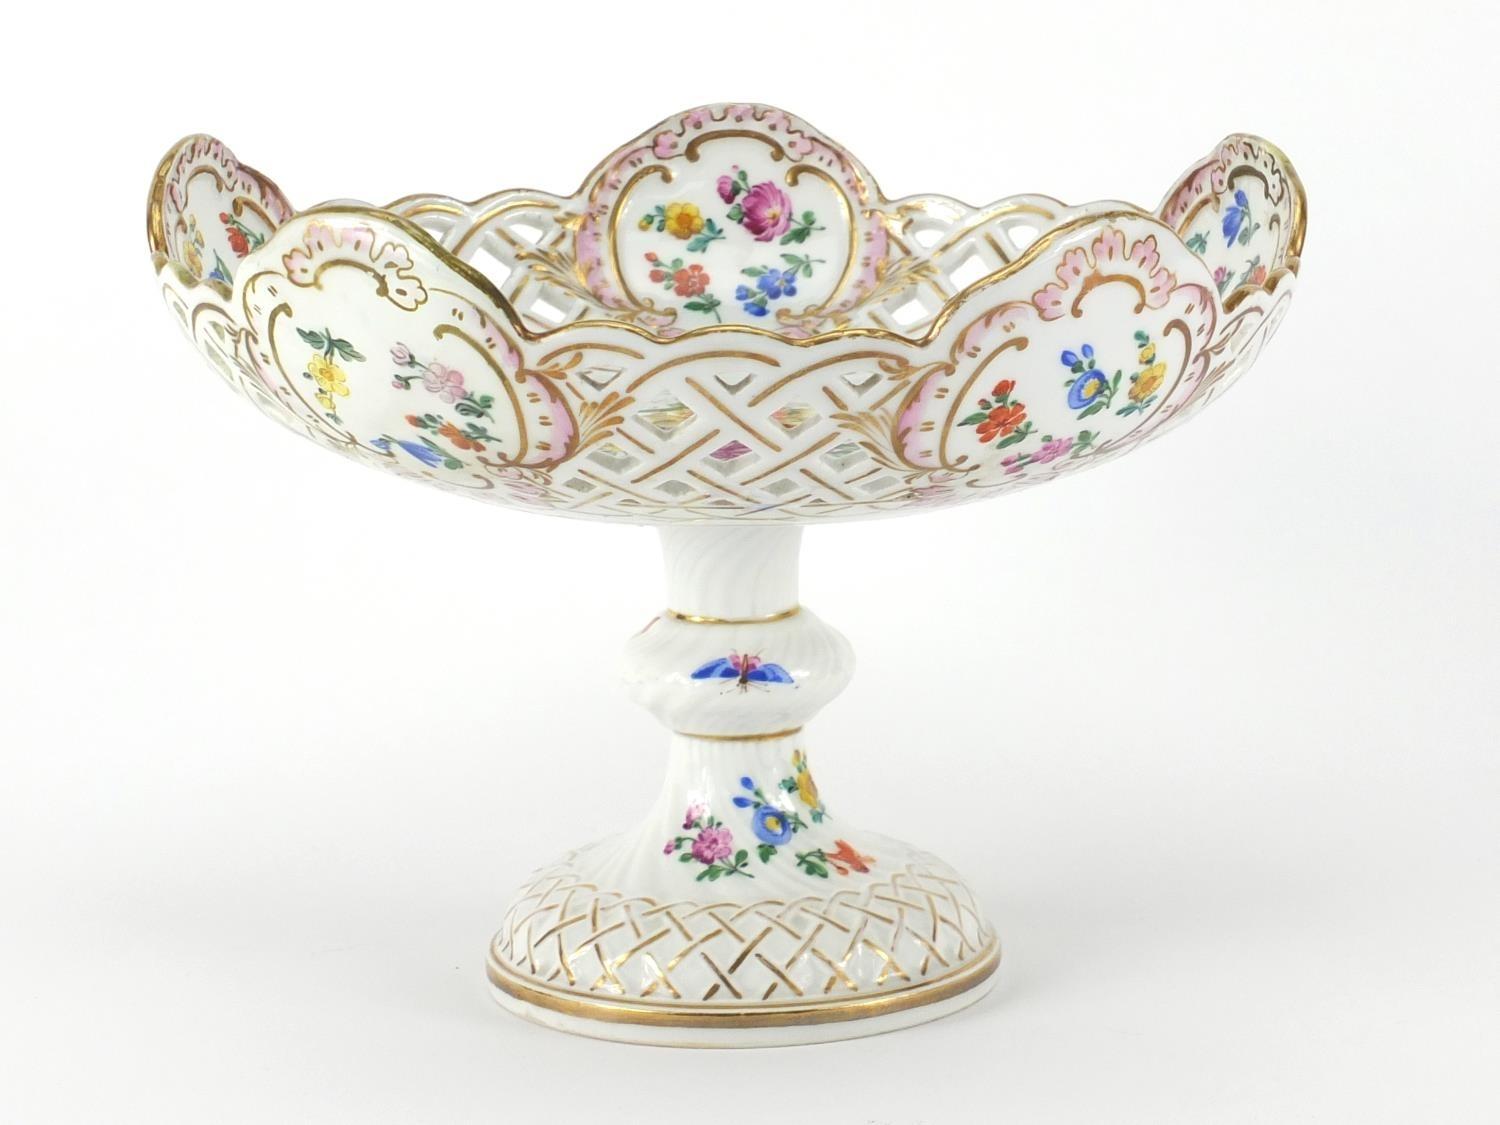 19th century Meissen porcelain tazza having a pierced rim, hand painted with stylised flowers,